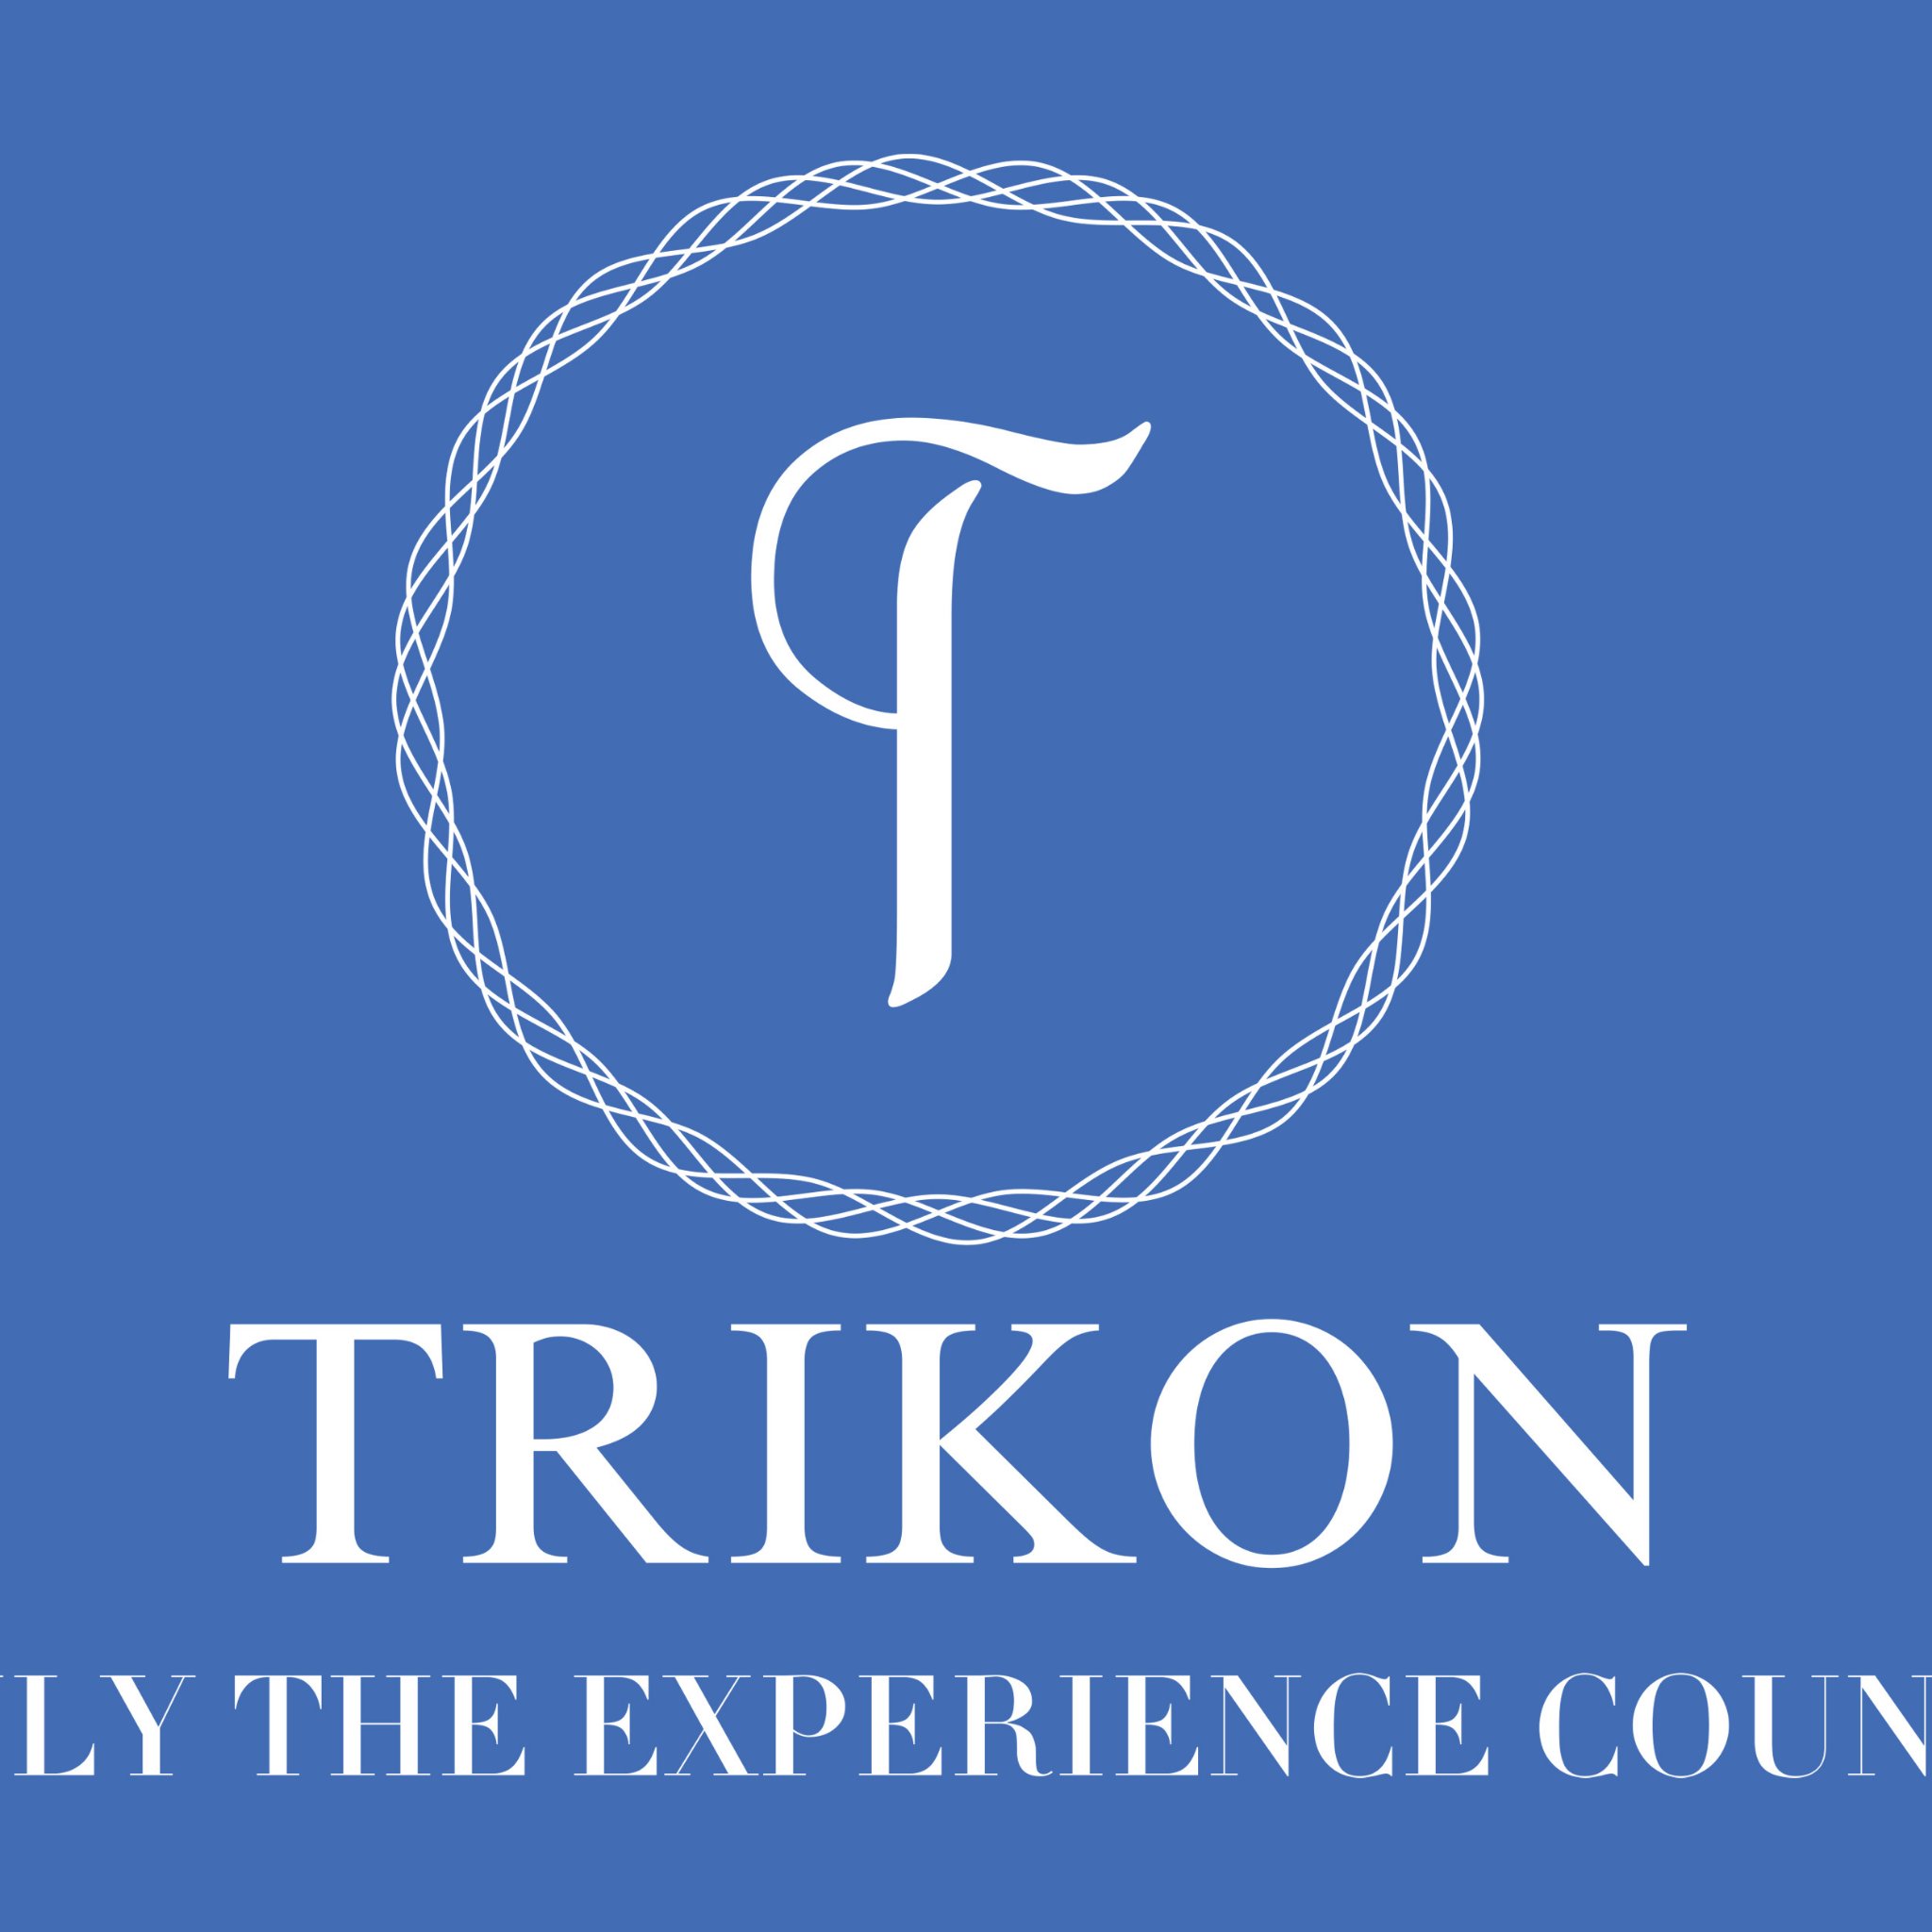 Trikon Journeys is a India tour operators in USA and Canada. Offers Guided India Tours, Private luxury tours ideal for small group, families, couples.